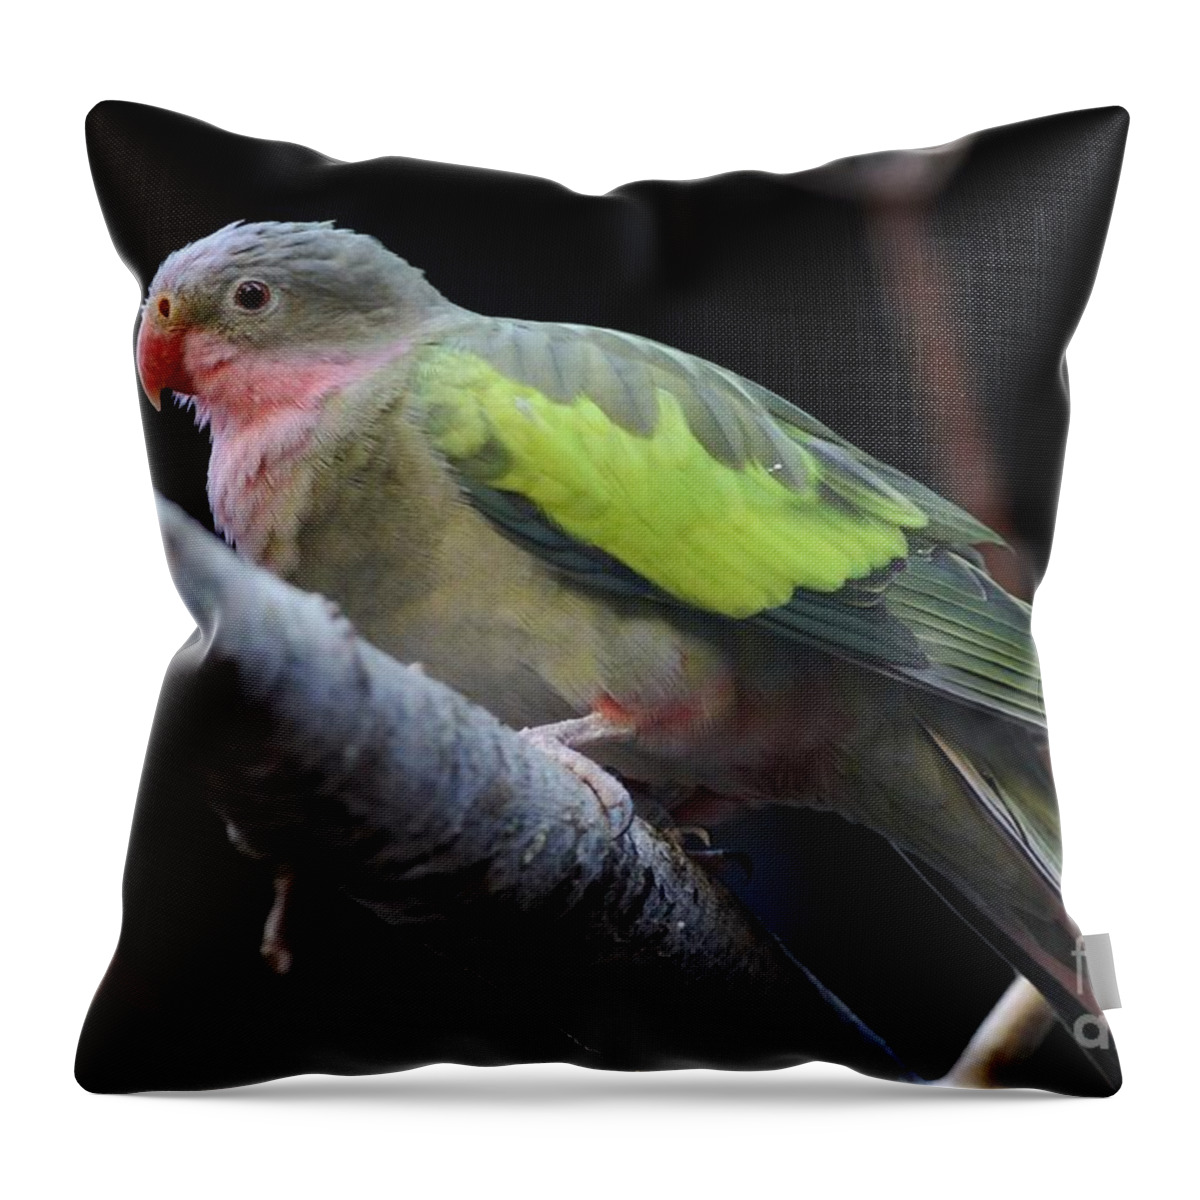 Zoo Throw Pillow featuring the photograph Peaceful by Tonya Hance